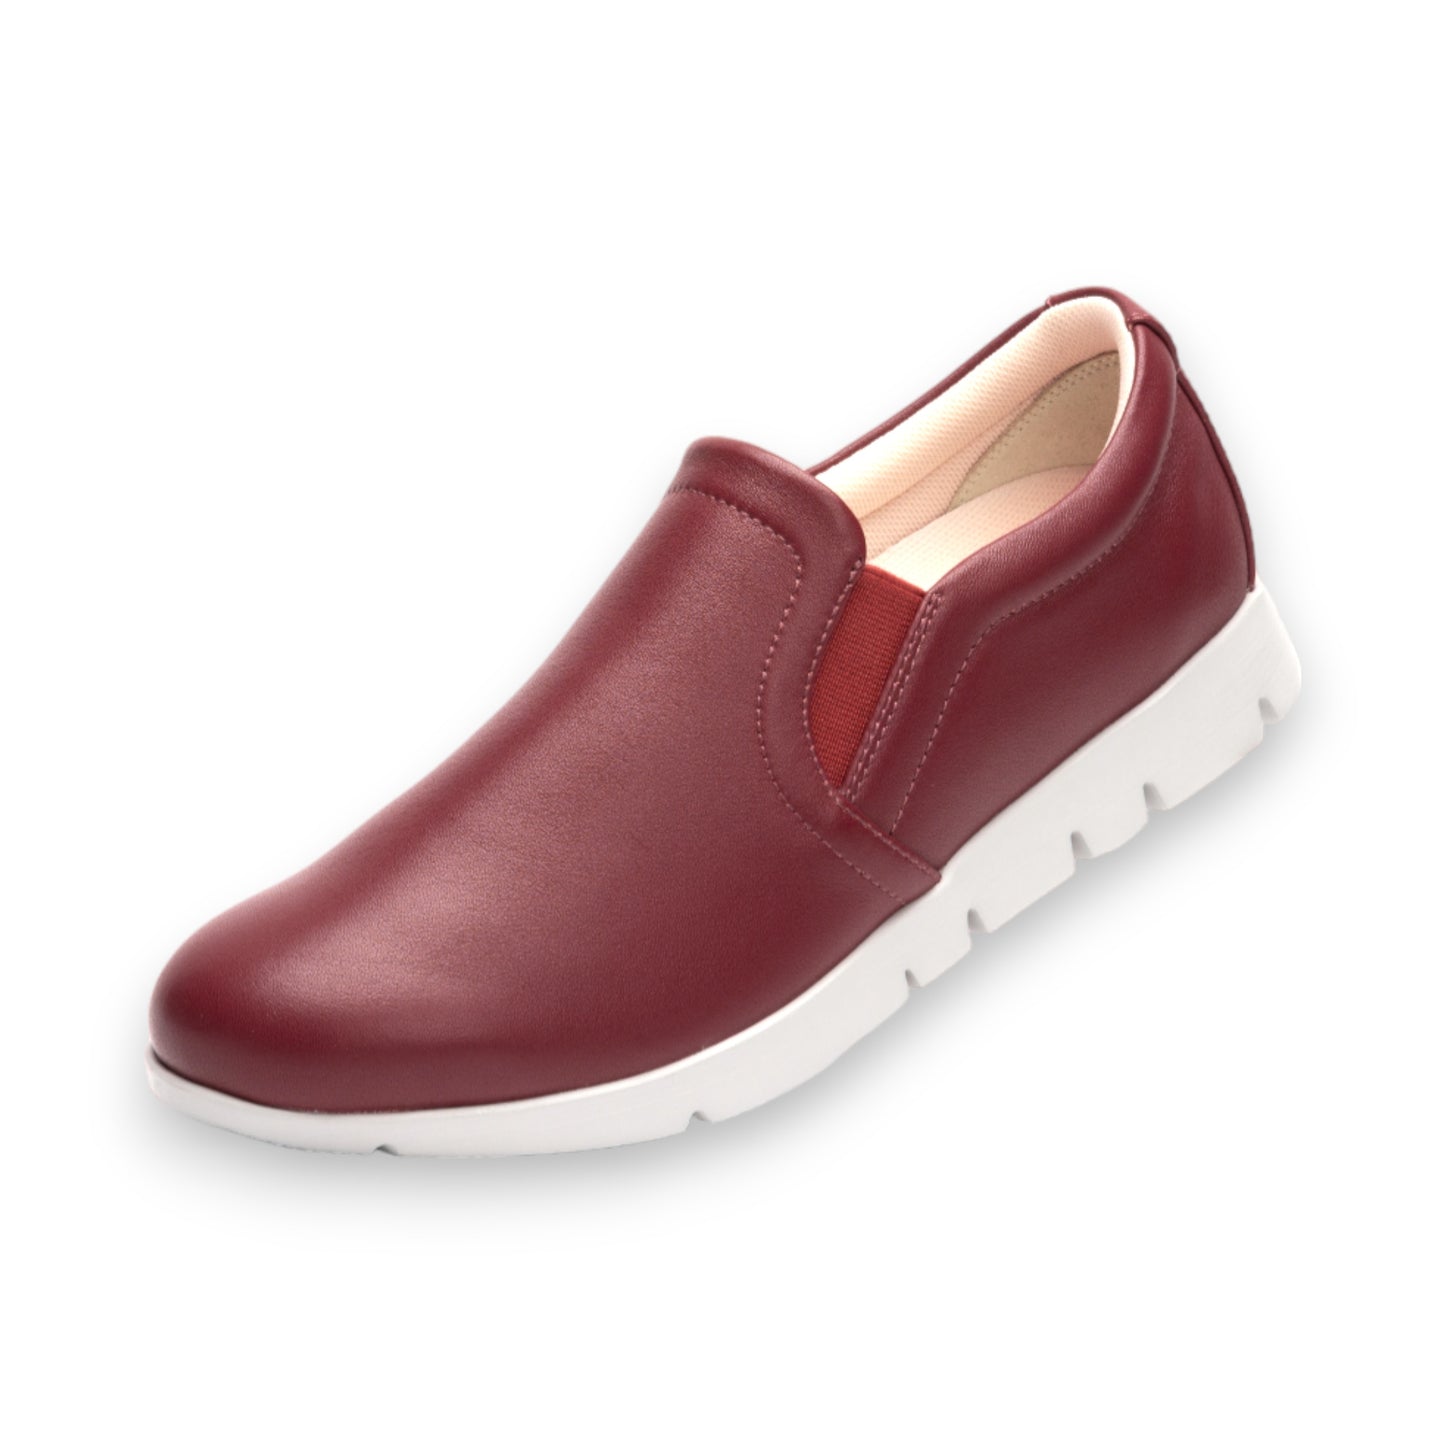 SOFTJOY | Soft cow leather slip-on sneakers #SJ003